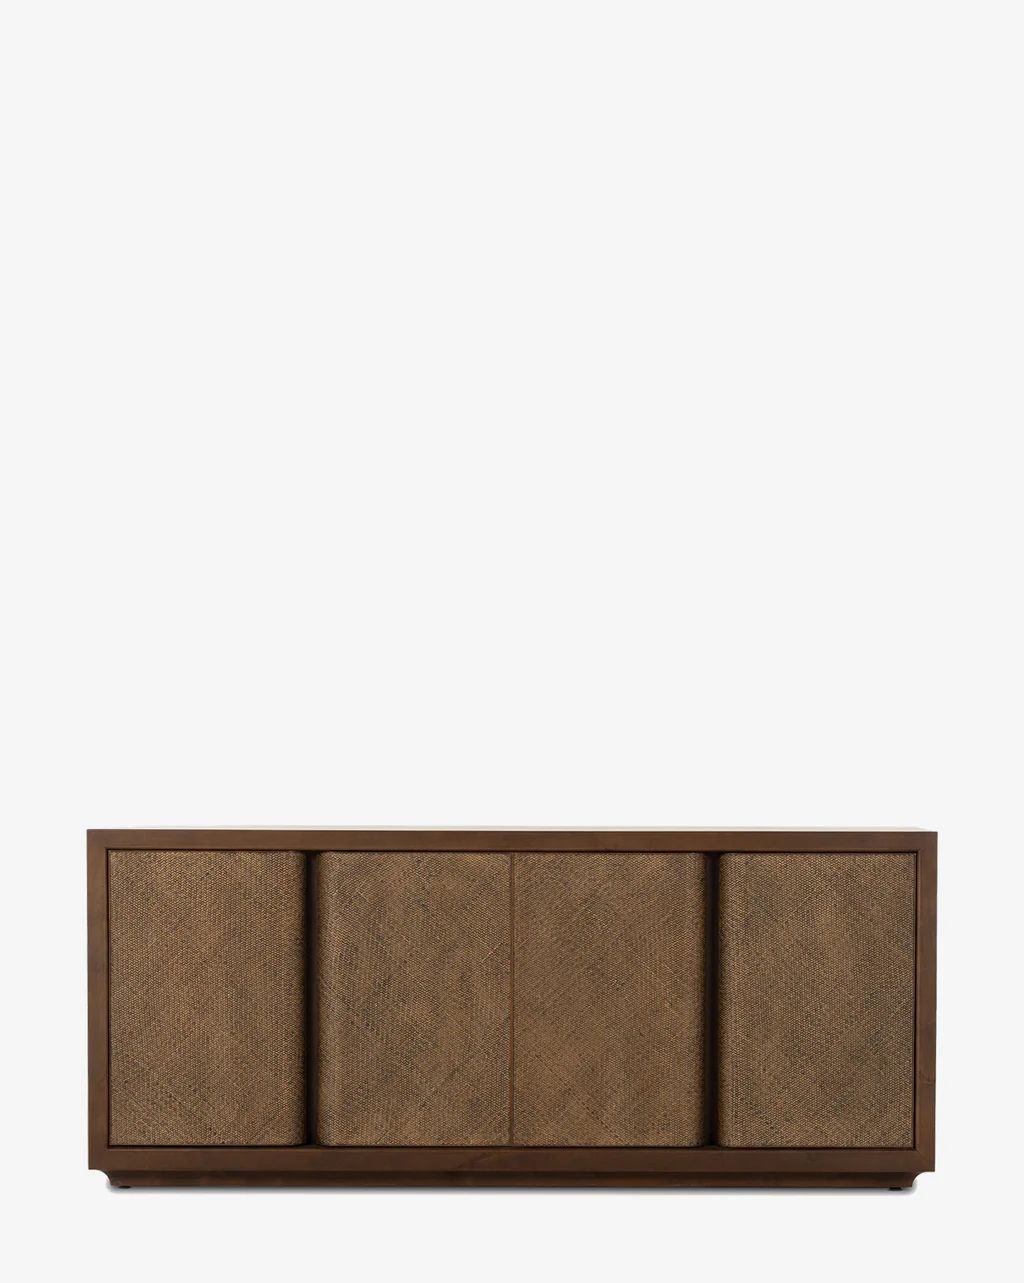 Coley Sideboard | McGee & Co.